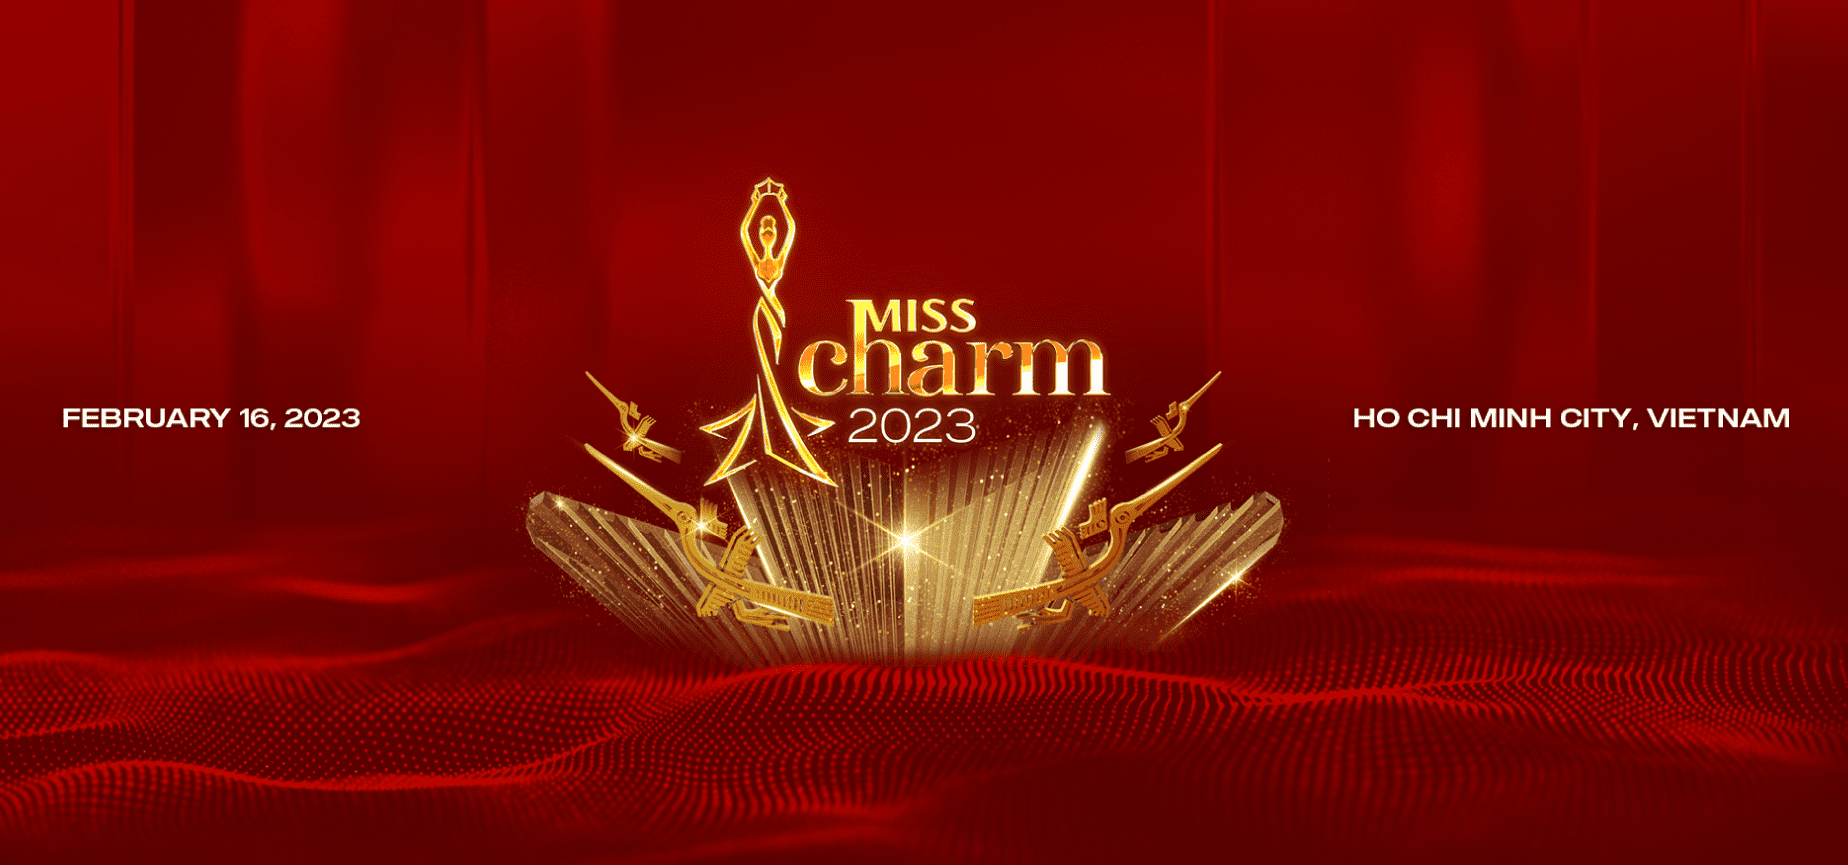 Miss Charm 2023 is a global-scale beauty pageant, which aims to search for the most exceptional female representatives from different countries all around the world, to appreciate their beauty as well as their cultures and educational backgrounds. The judging criteria for the pageant will involve beauty, physique, intellect as well as the ability to captivate the audience with the appeal.